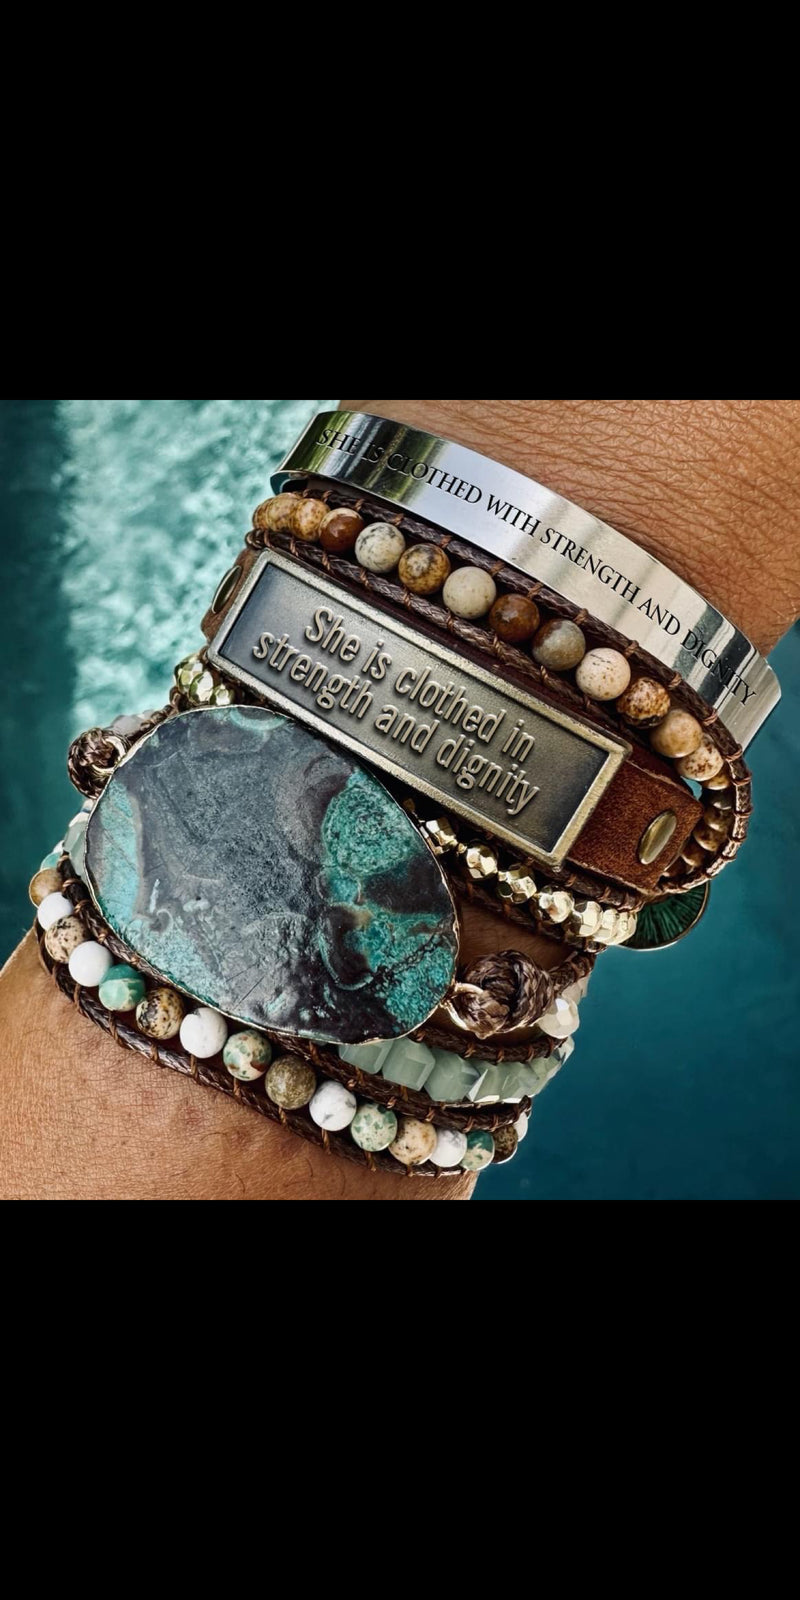 She is Clothed in Strength& Dignity & Wrap Bracelet Set